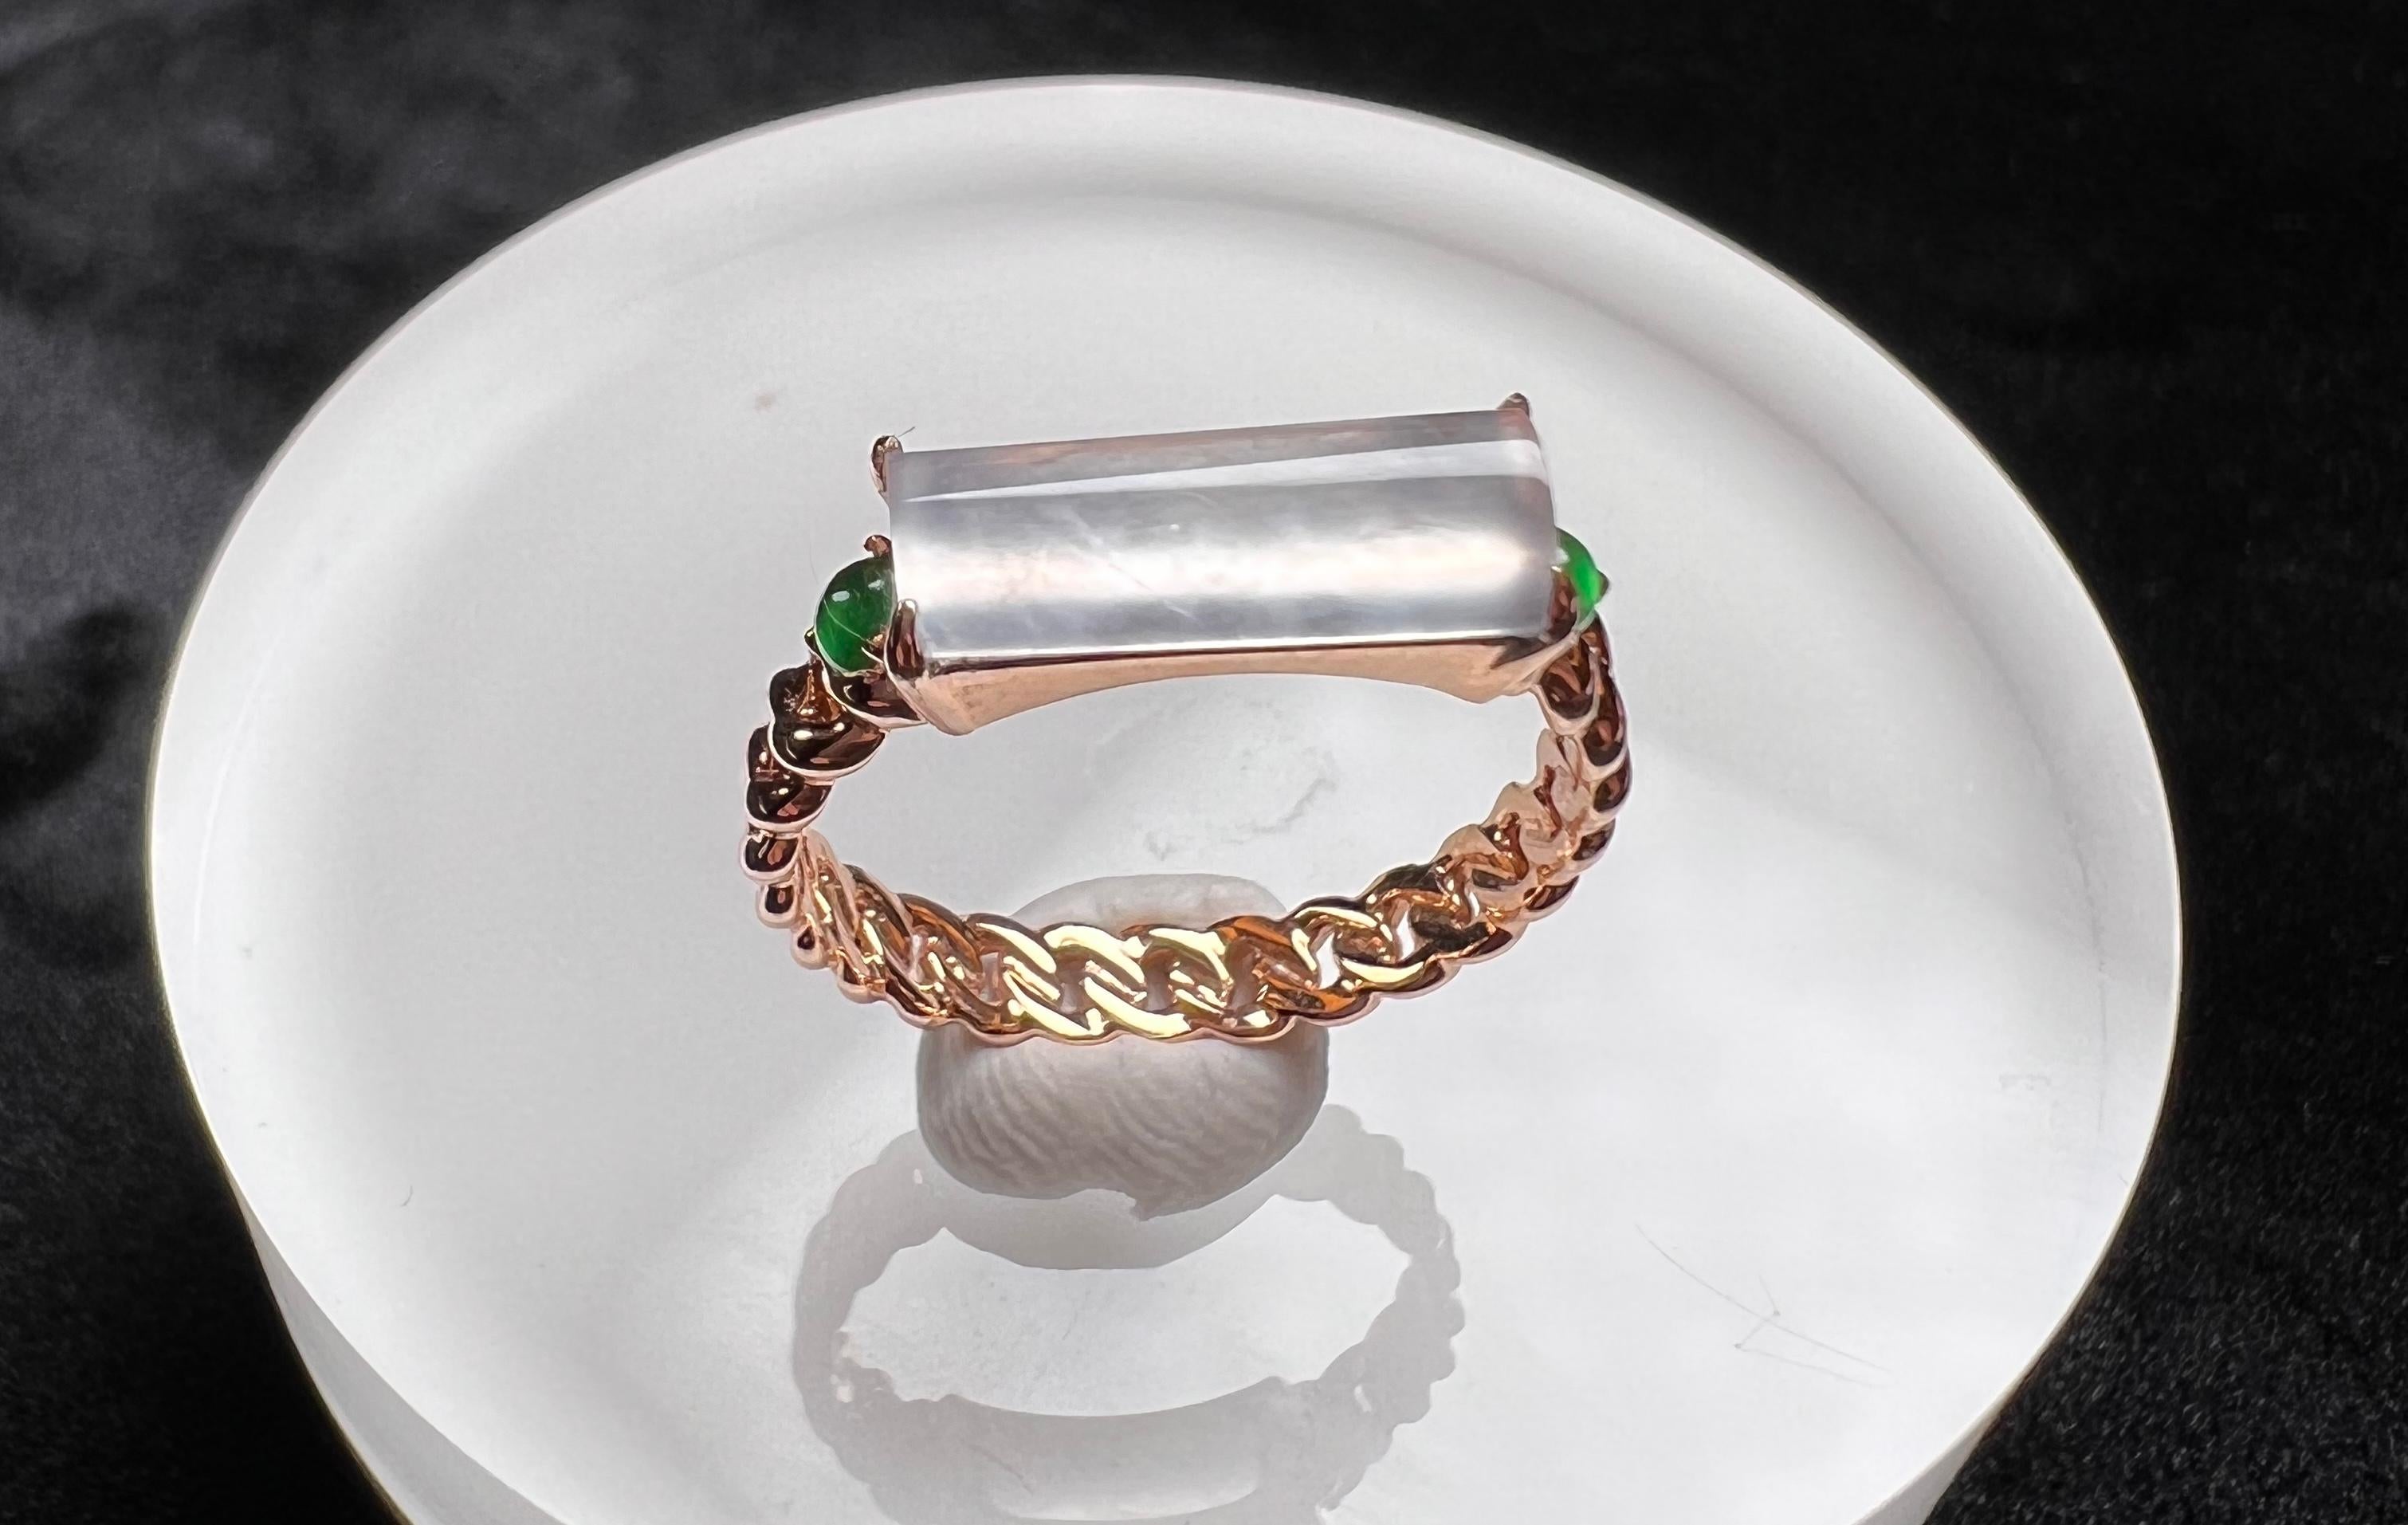 18K Rose Gold Icy Jadeite Green Jadeite Horizontal Bar Ring, Cocktail Ring

Total weight (approx.): 2.8g
Centre setting measurement (approx.): 12.9*5mm

This ring is resizable.
Get in touch with us to know more details and your shipping